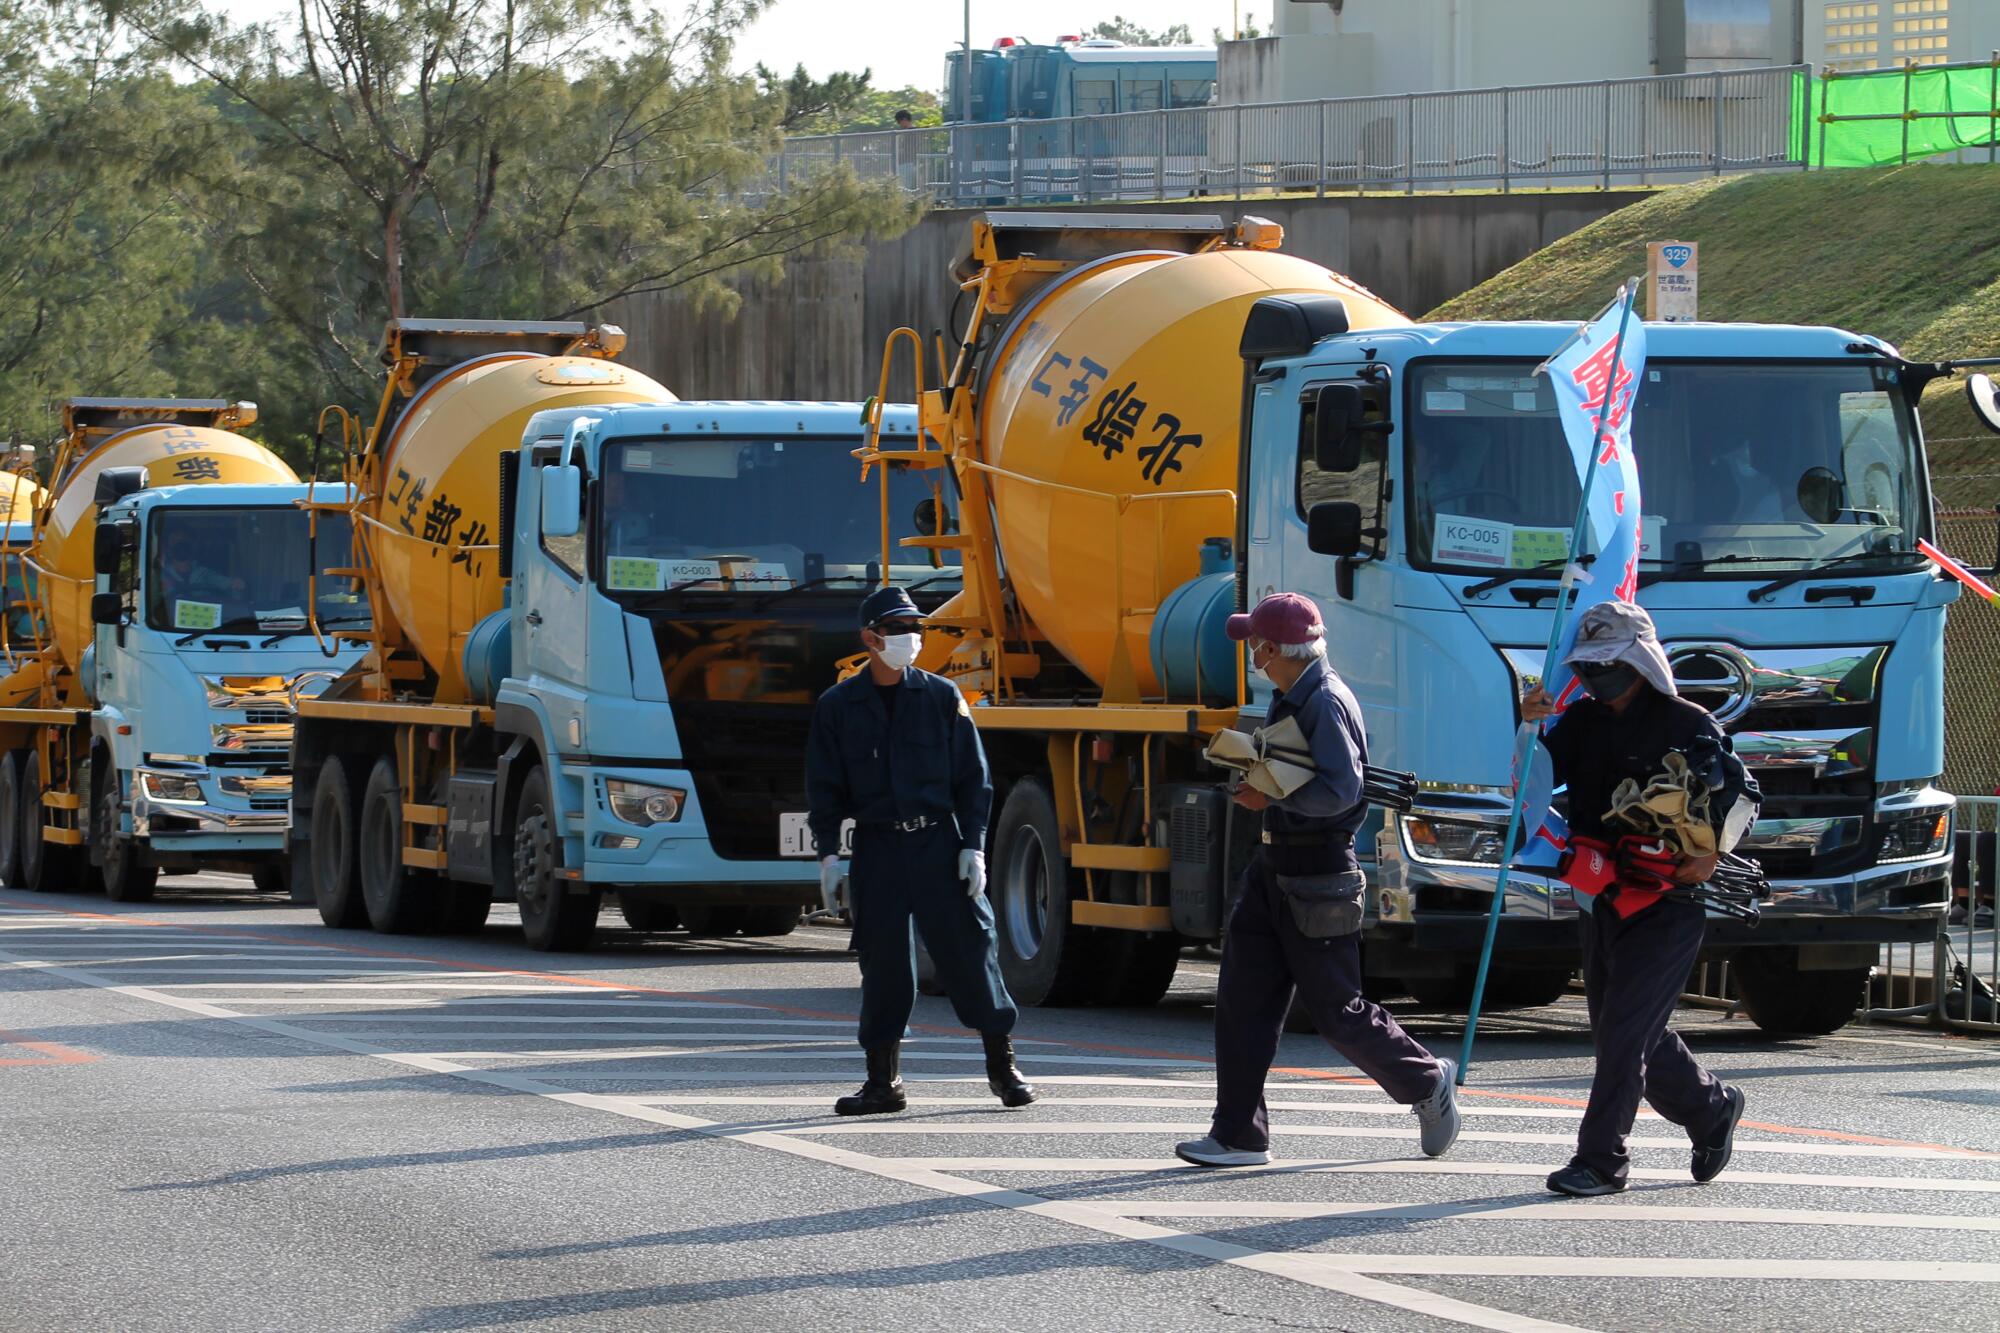 Cement trucks line up while a protest blocks their path on Japan's Okinawa island.